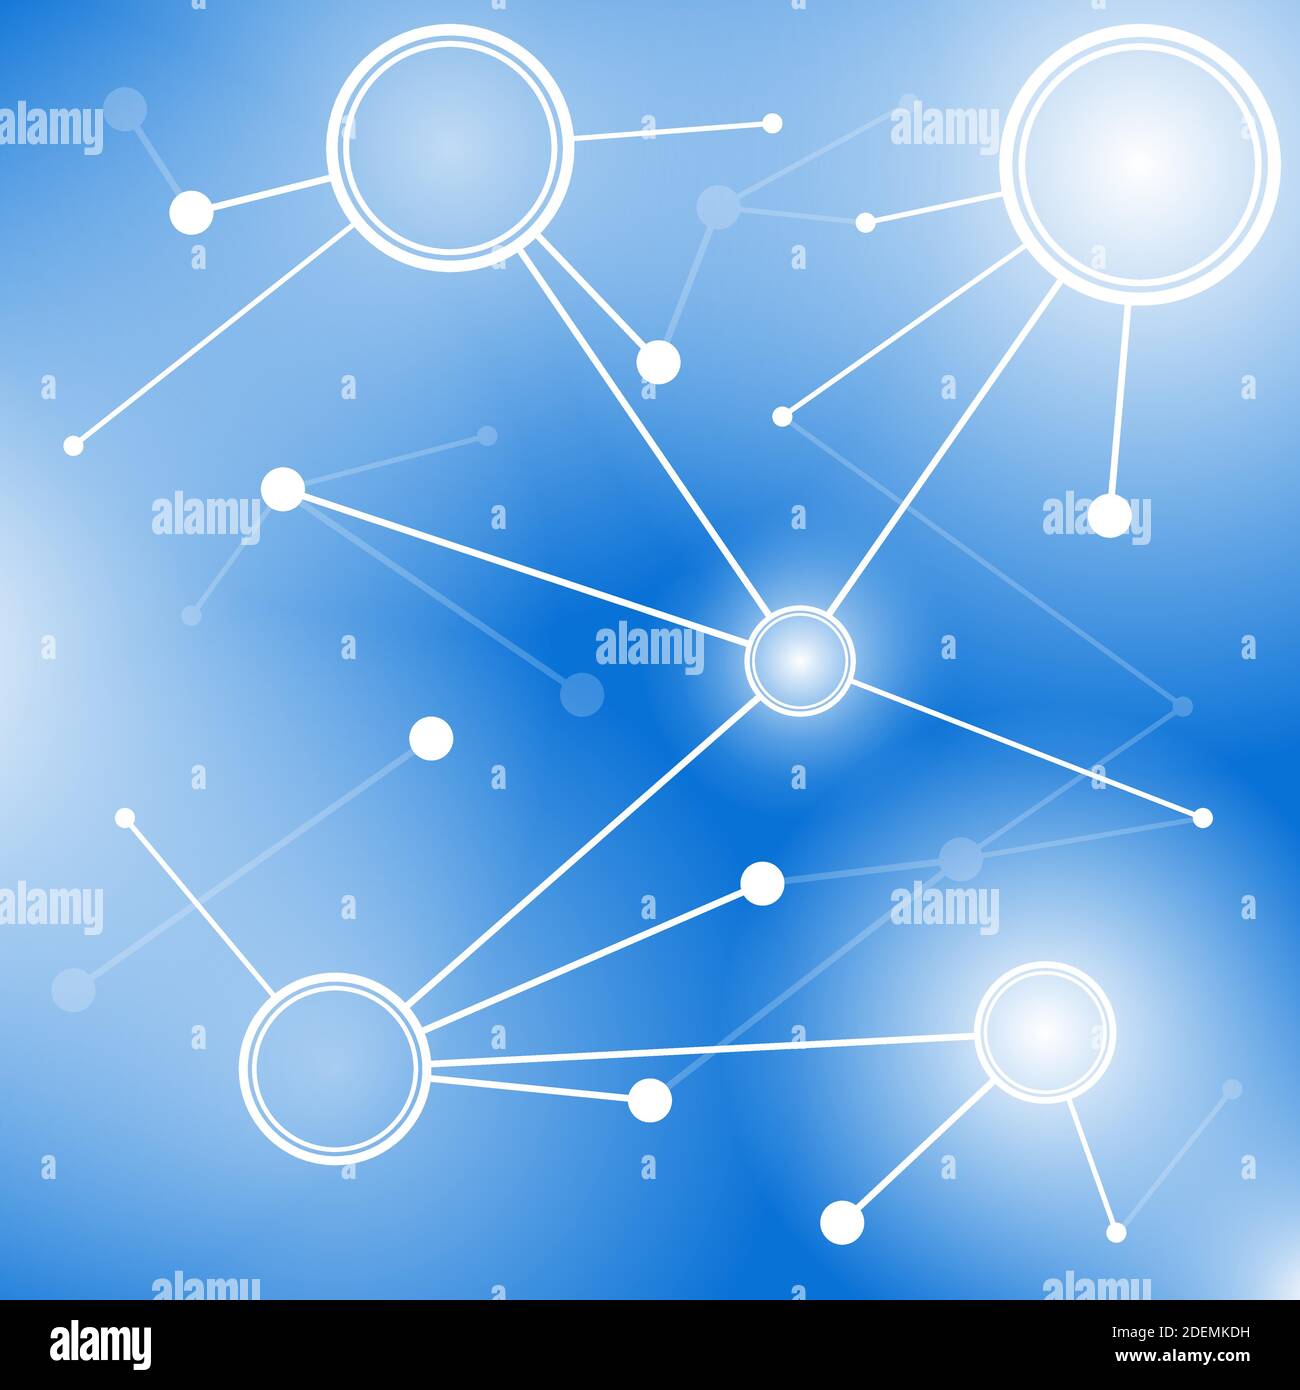 network and networking concept background vector illustration Stock Vector